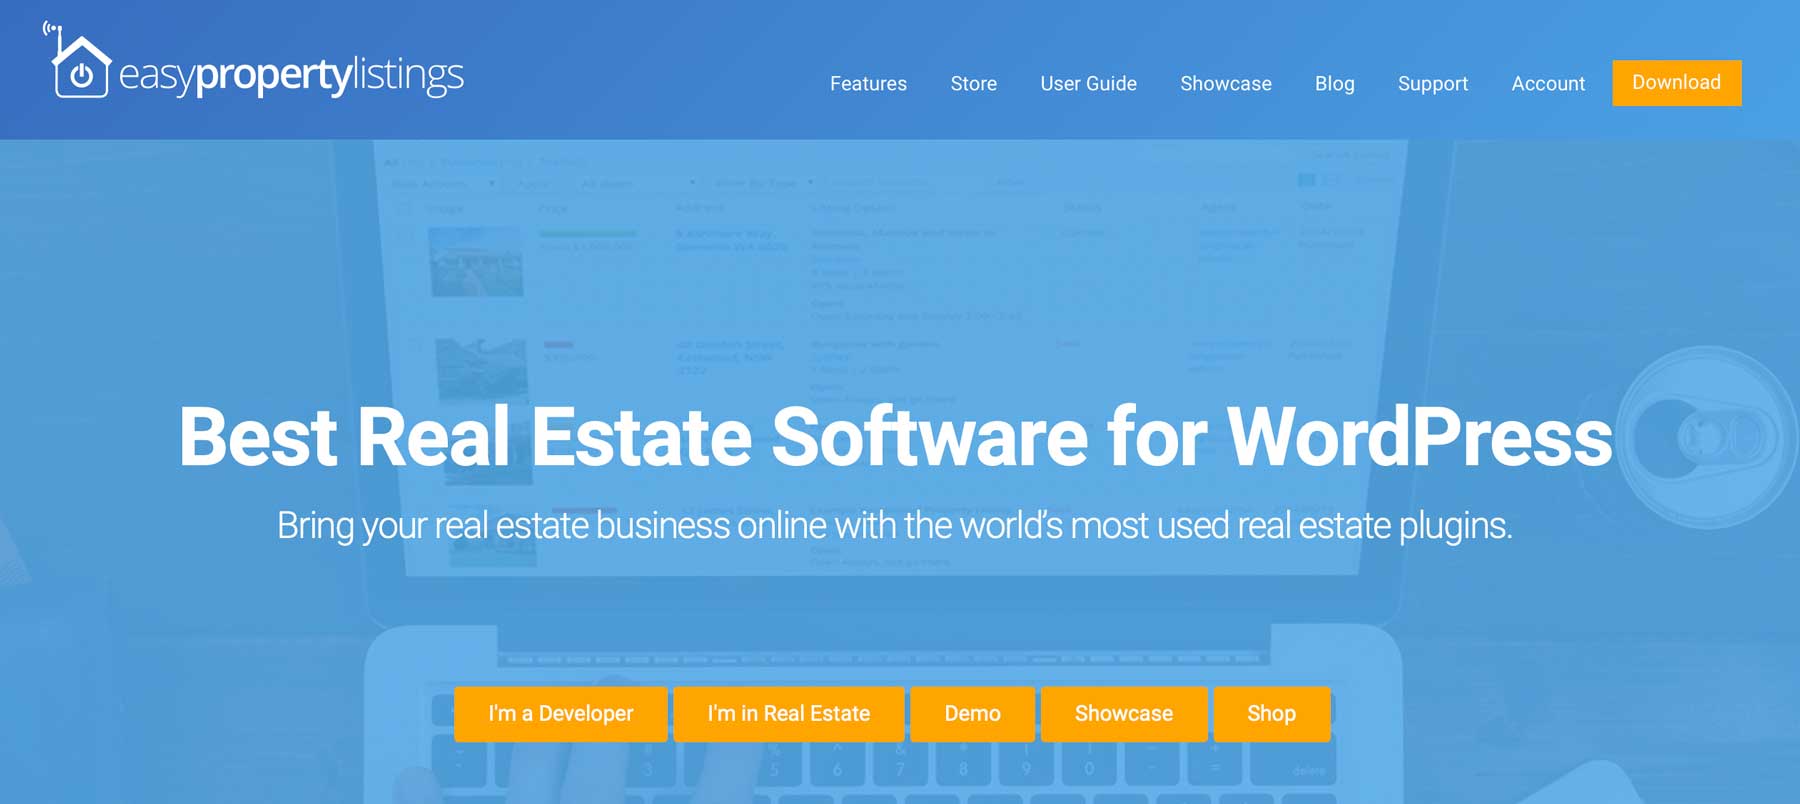 The Easy Property Listings plugin